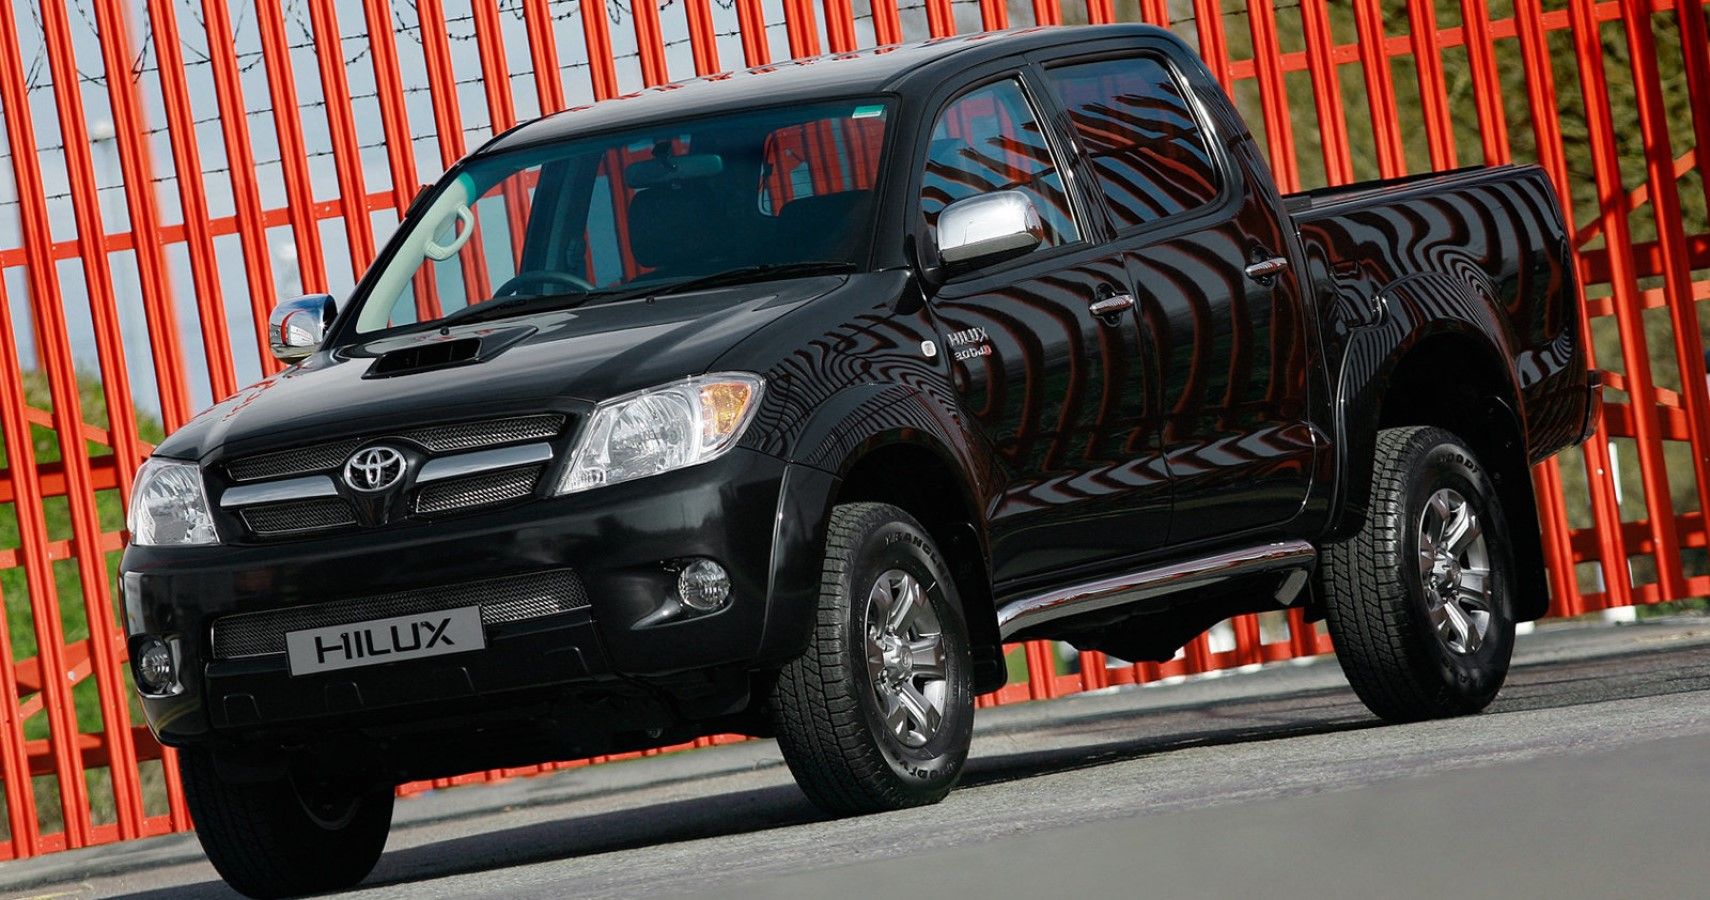 2009 Toyota Hilux High Power front third quarter view